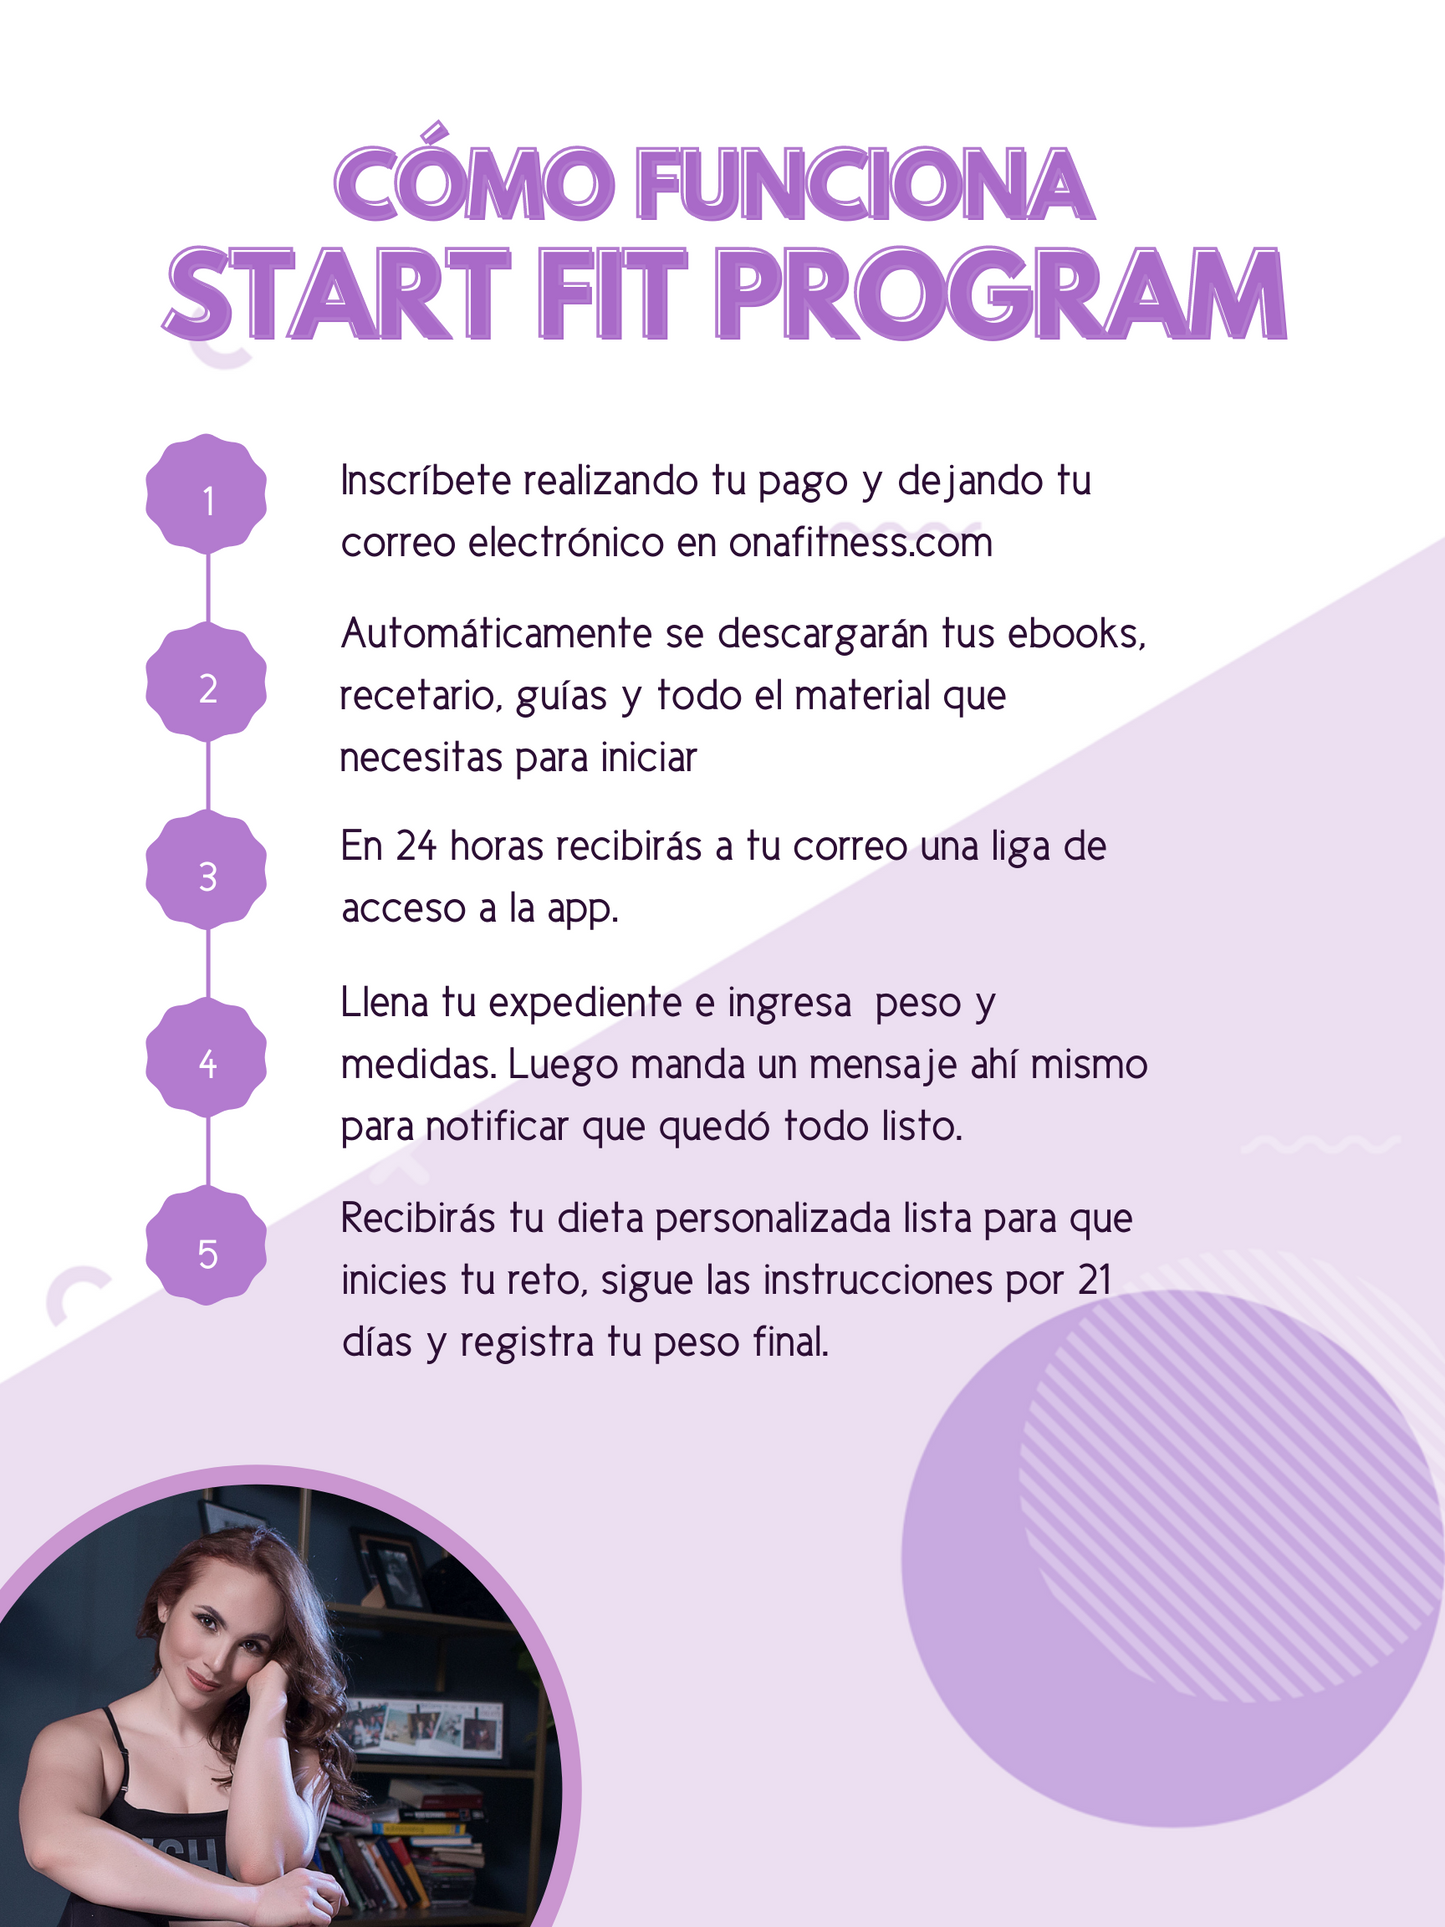 START FIT PROGRAM- Lose weight and lose fat in 21 days